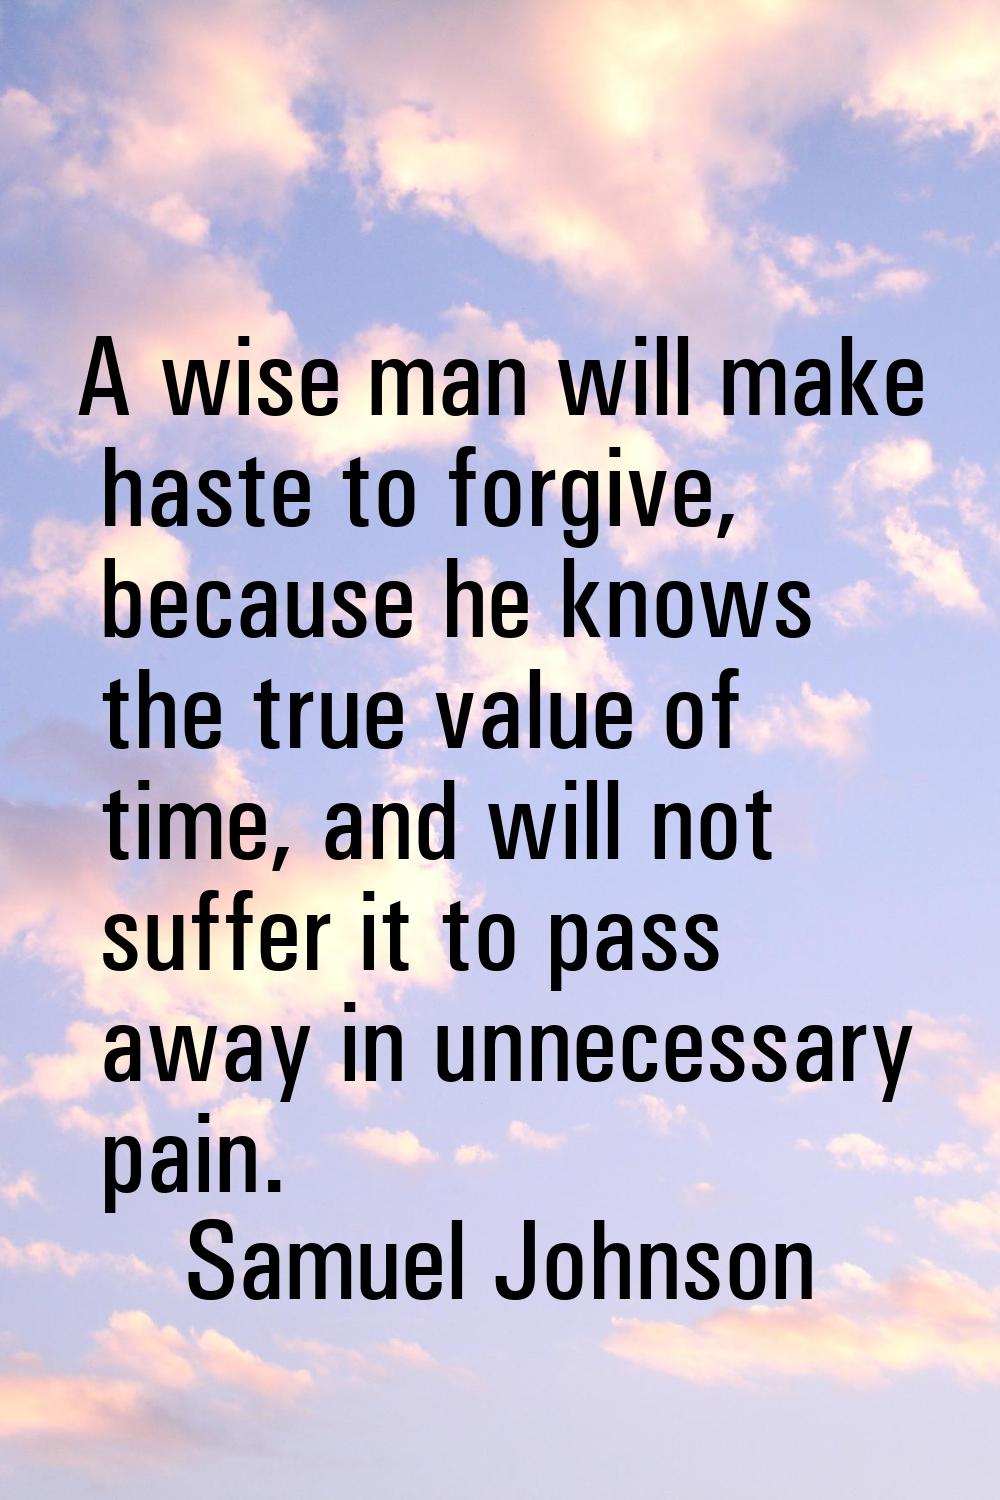 A wise man will make haste to forgive, because he knows the true value of time, and will not suffer